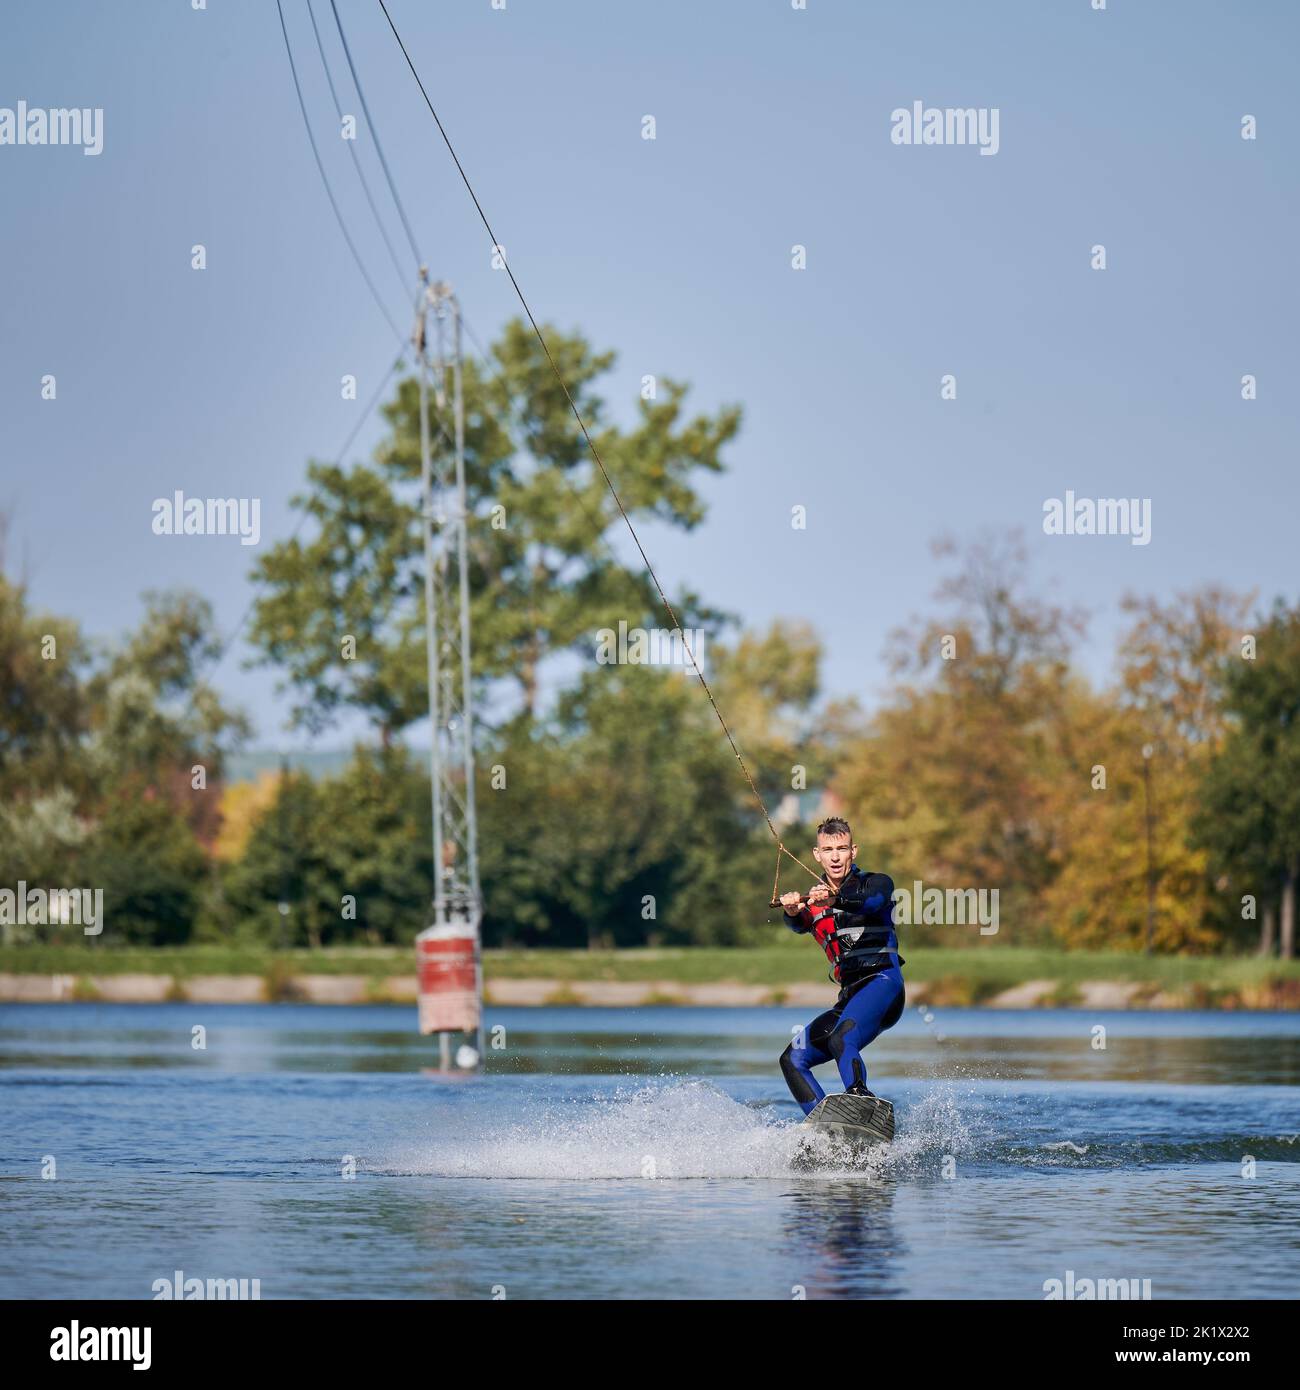 Wakeboarder surfing on lake. Young man surfer having fun wakeboarding in the cable park. Water sport, outdoor activity concept. Stock Photo